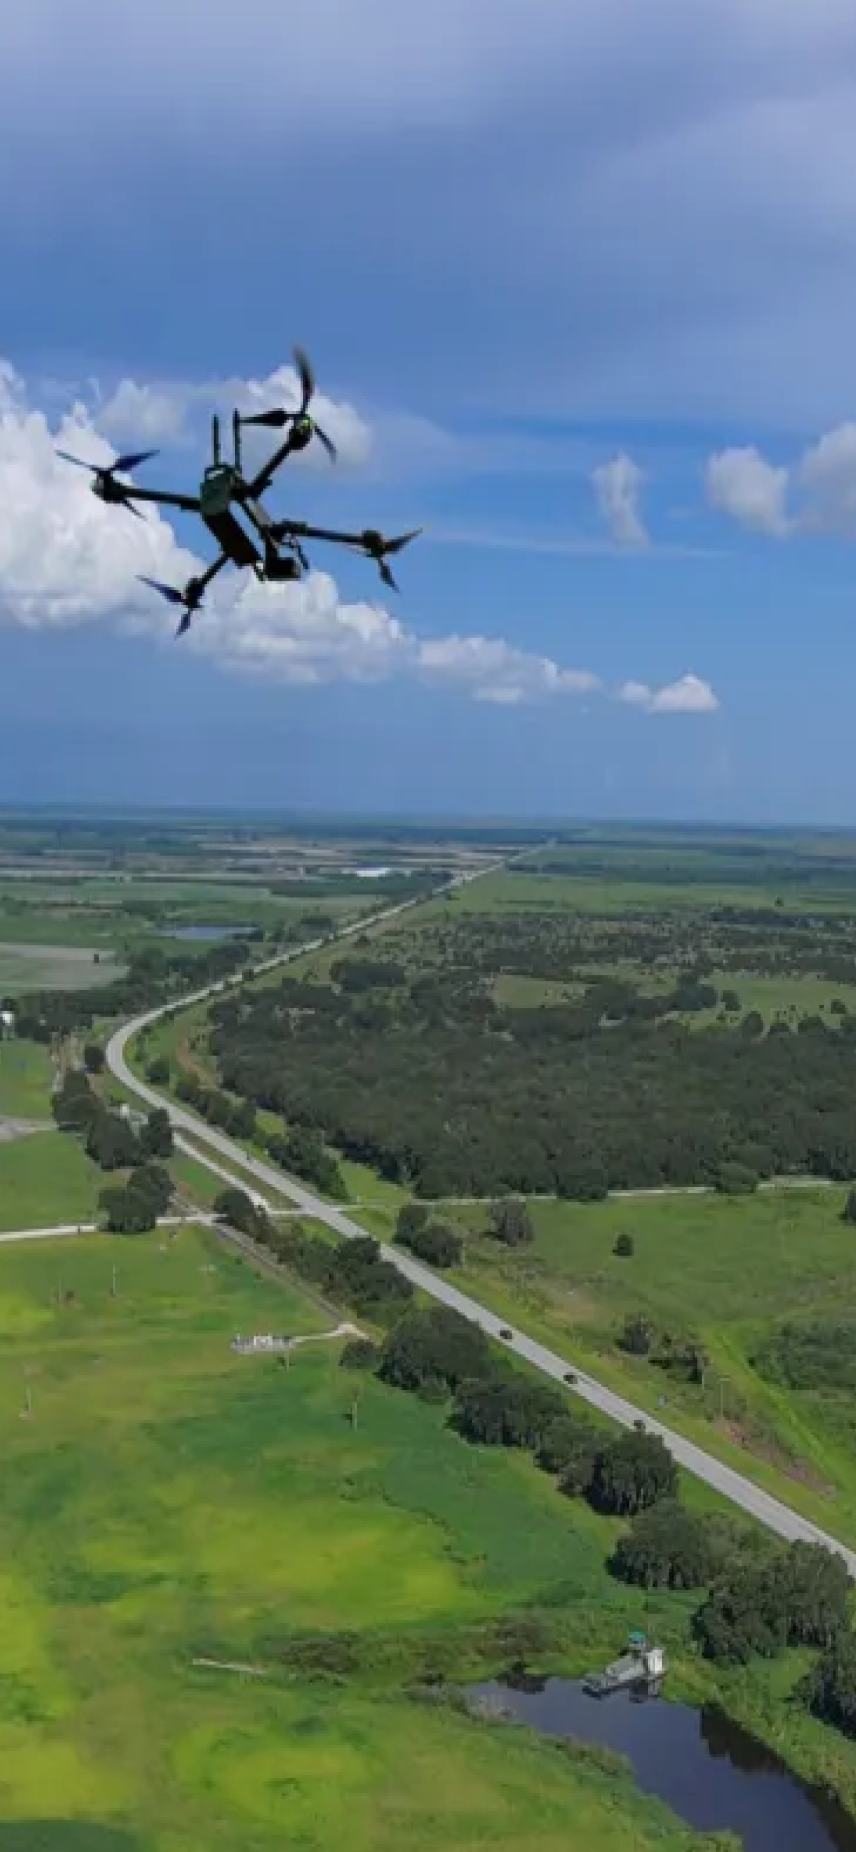 Drone in flight over rural stretch of highway portrait view